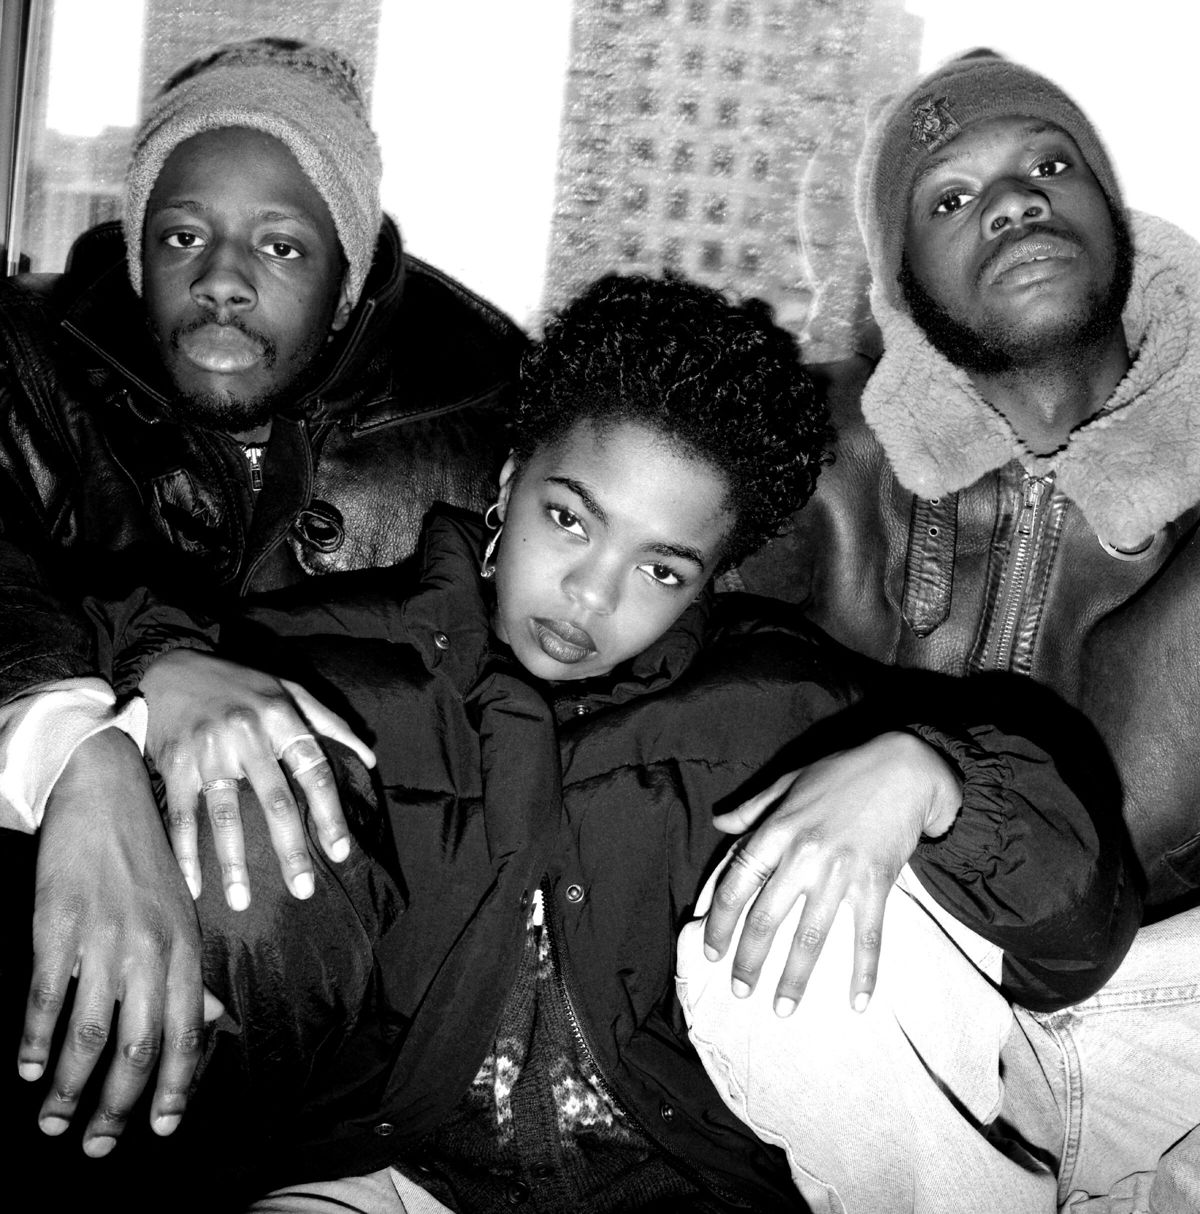 <i>David Corio/Michael Ochs Archives/Getty Images</i><br/>The Fugees are reuniting for their first shows in 15 years.